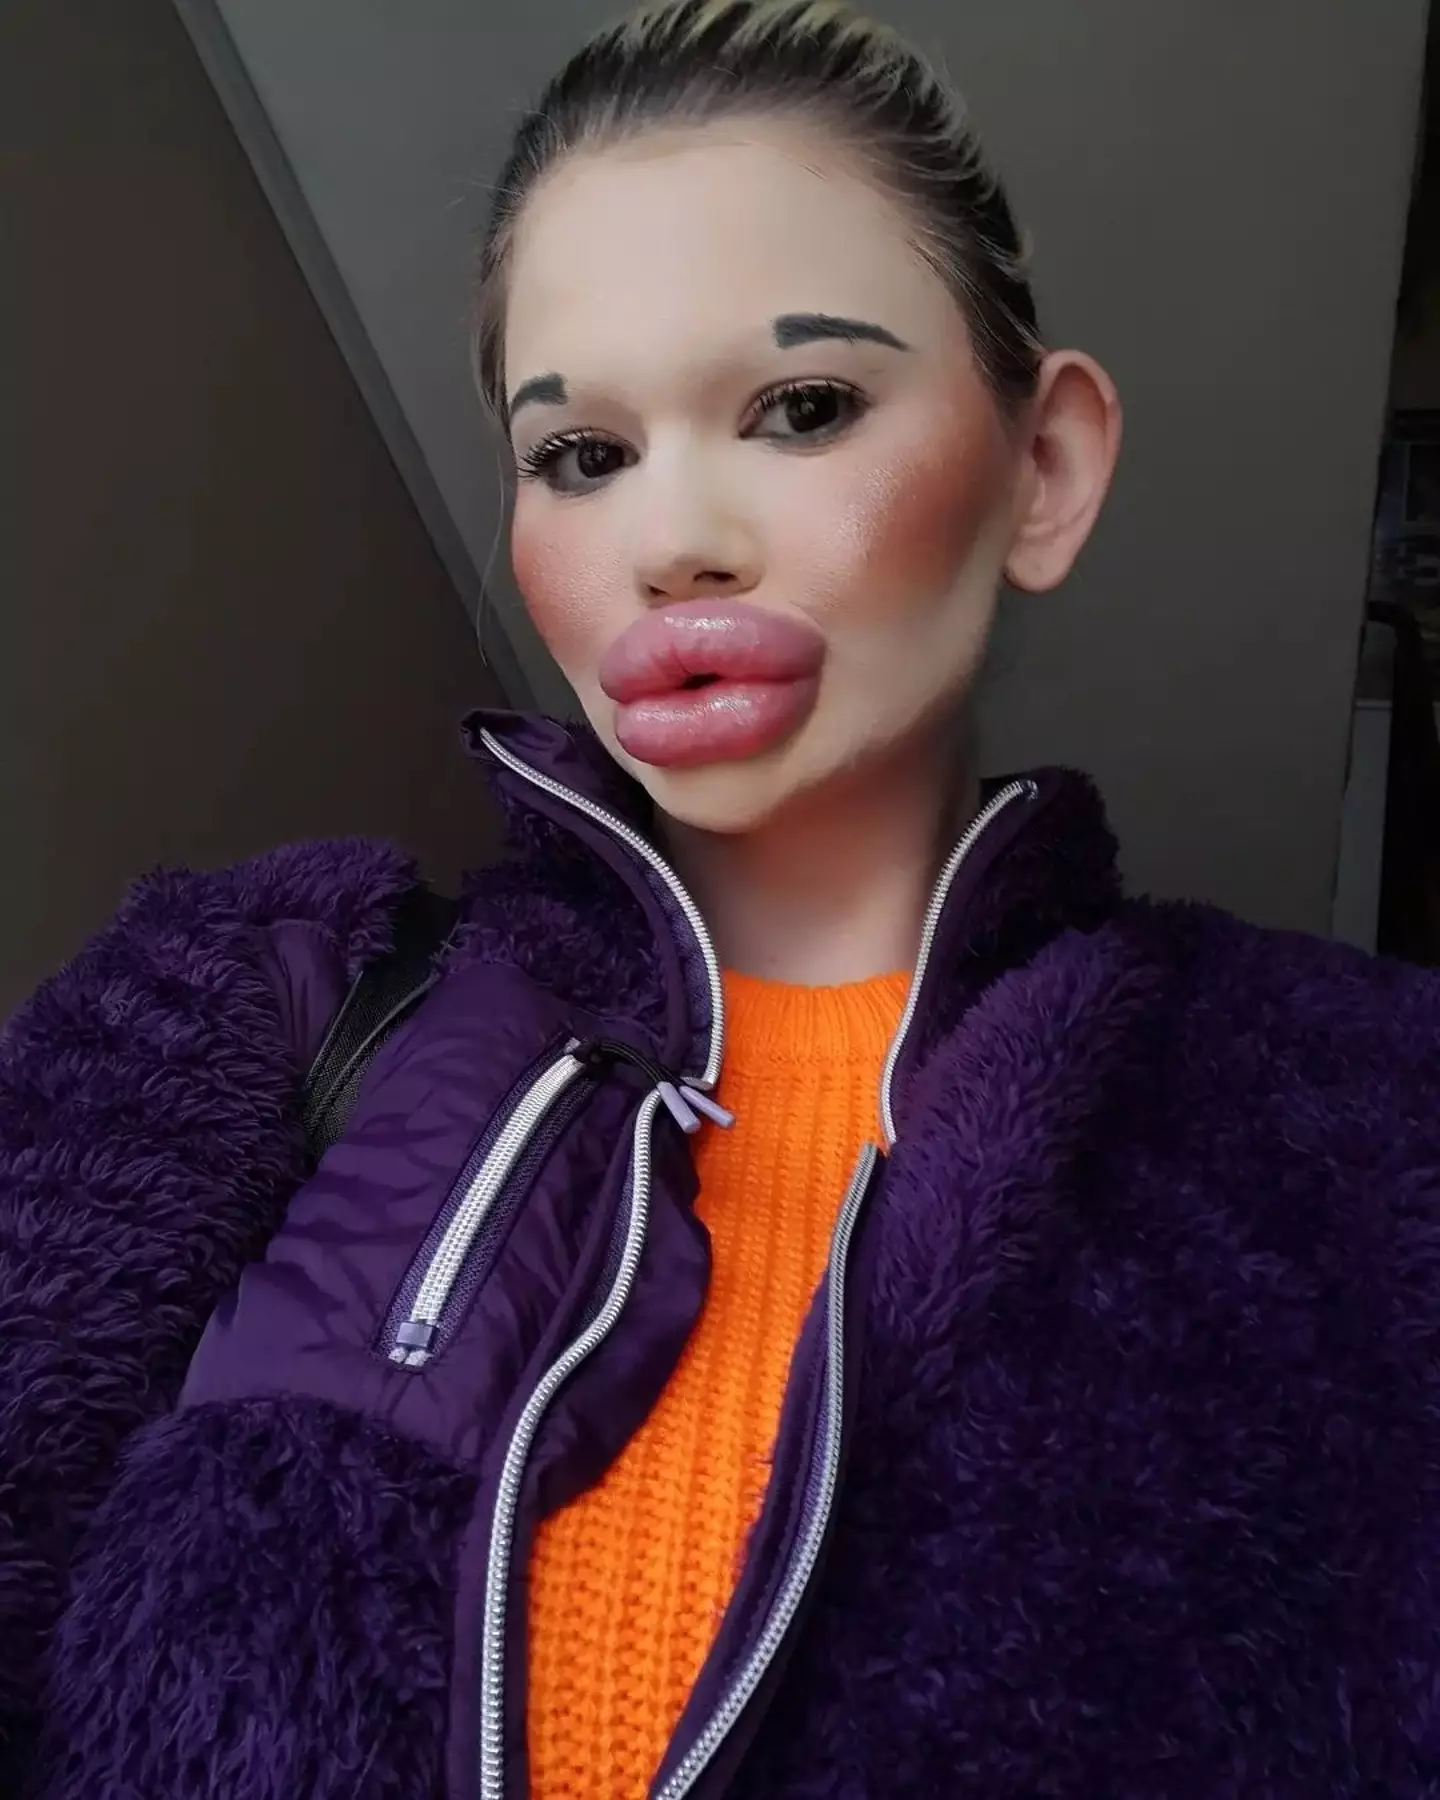 The social media influencer said not everyone is a fan of her new look.